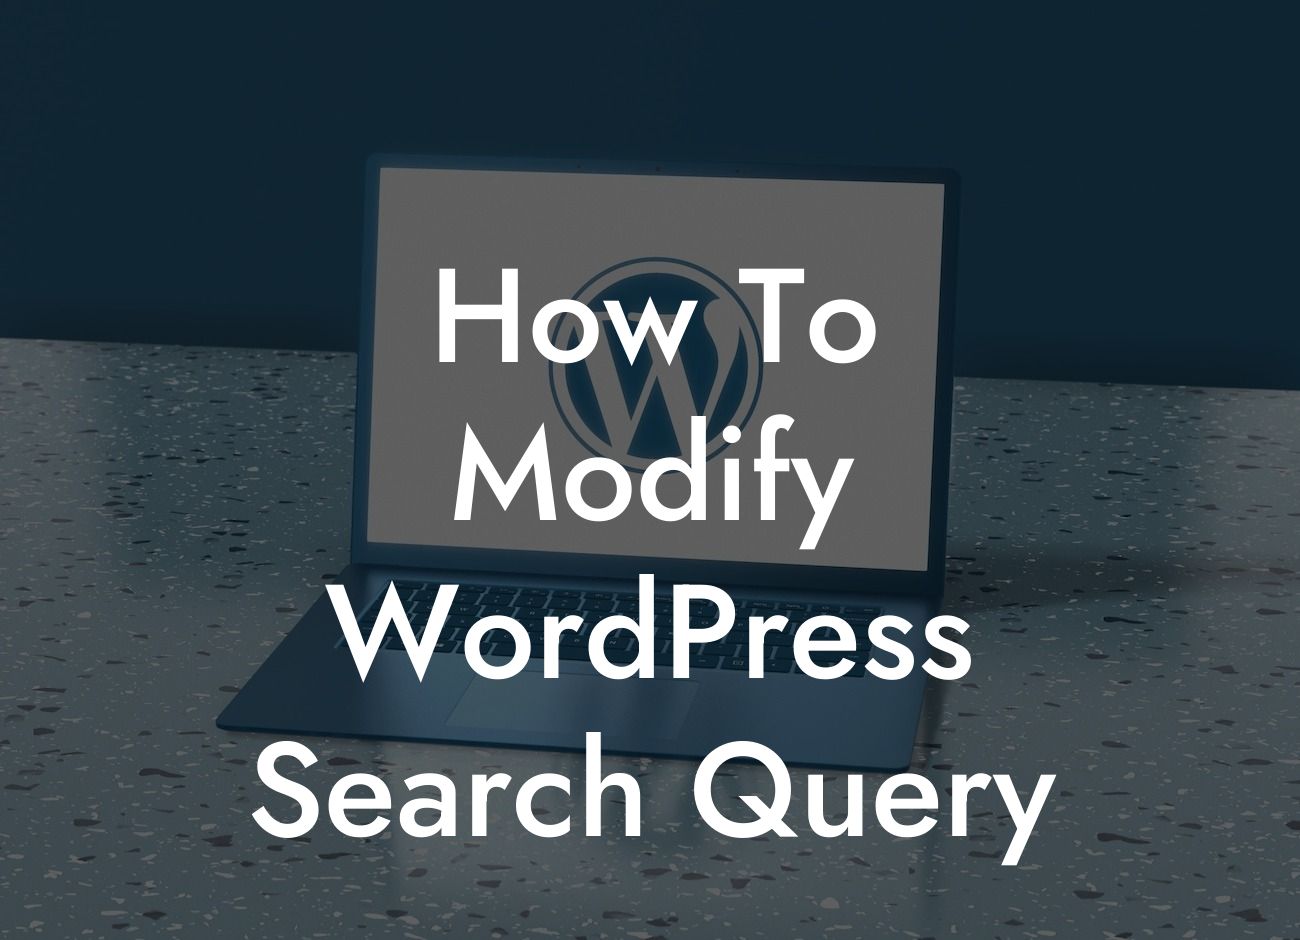 How To Modify WordPress Search Query